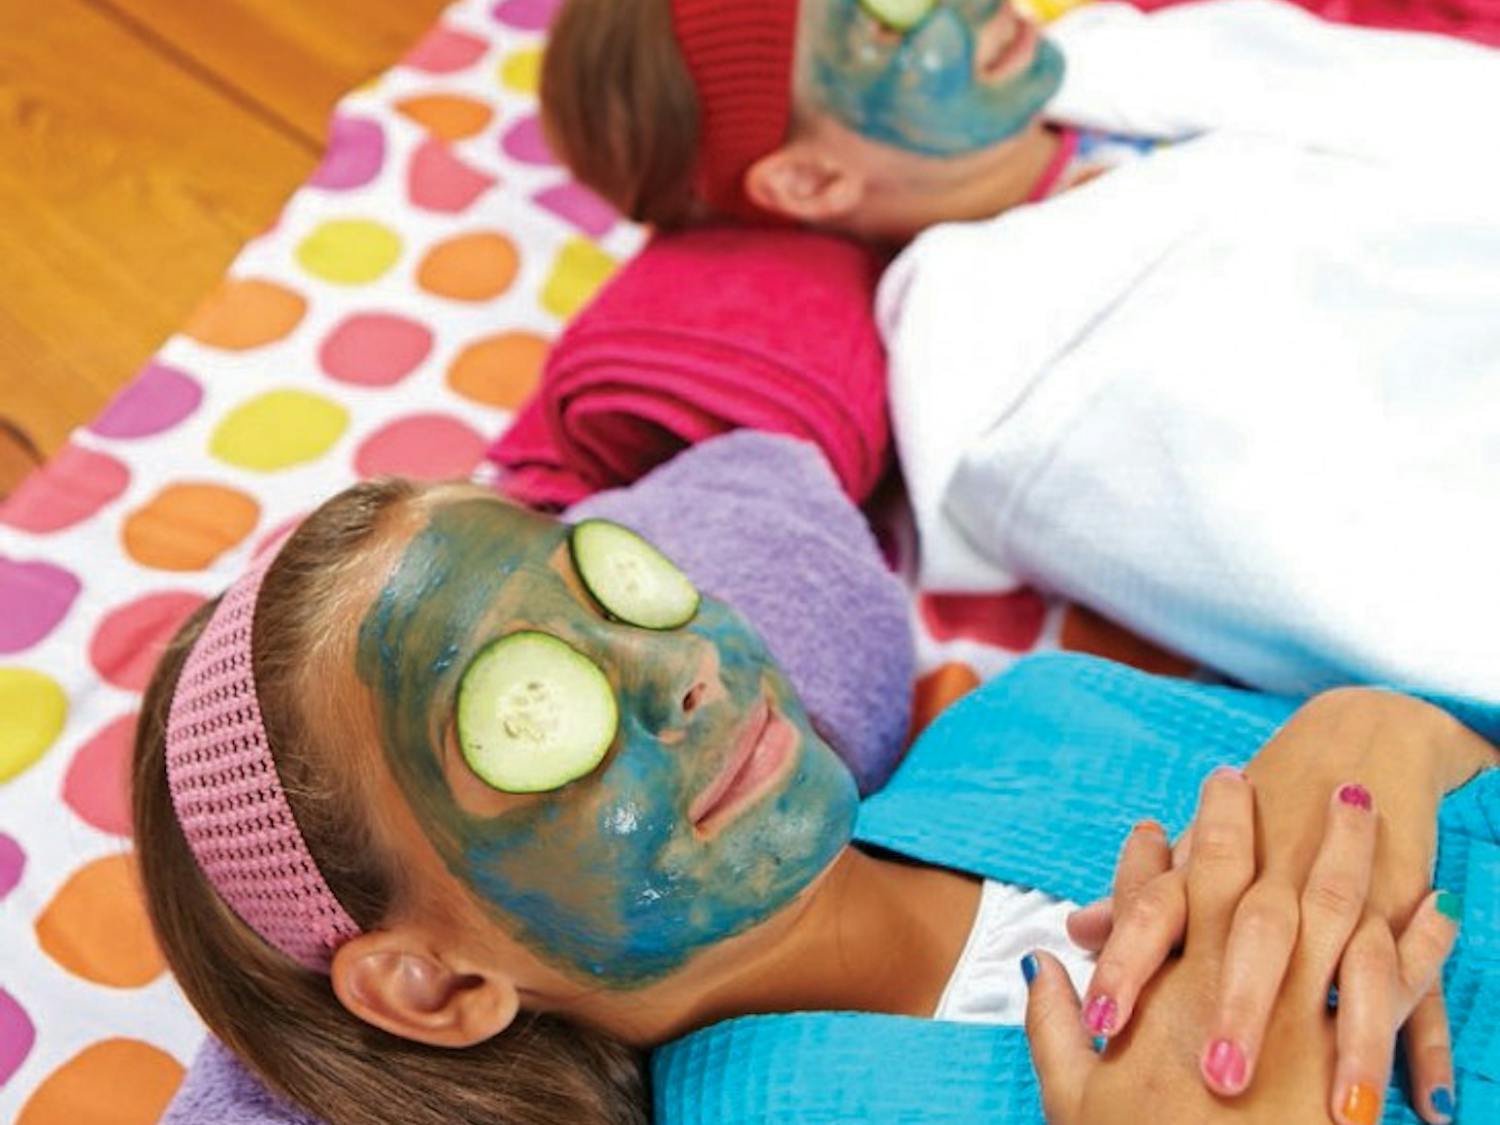 Have guests paint each other's faces with a homemade facial mask - then relax with some cooling cucumber slices resting on guests' eyes. (Ronnie Andren/FamilyFun Magazine/MCT)